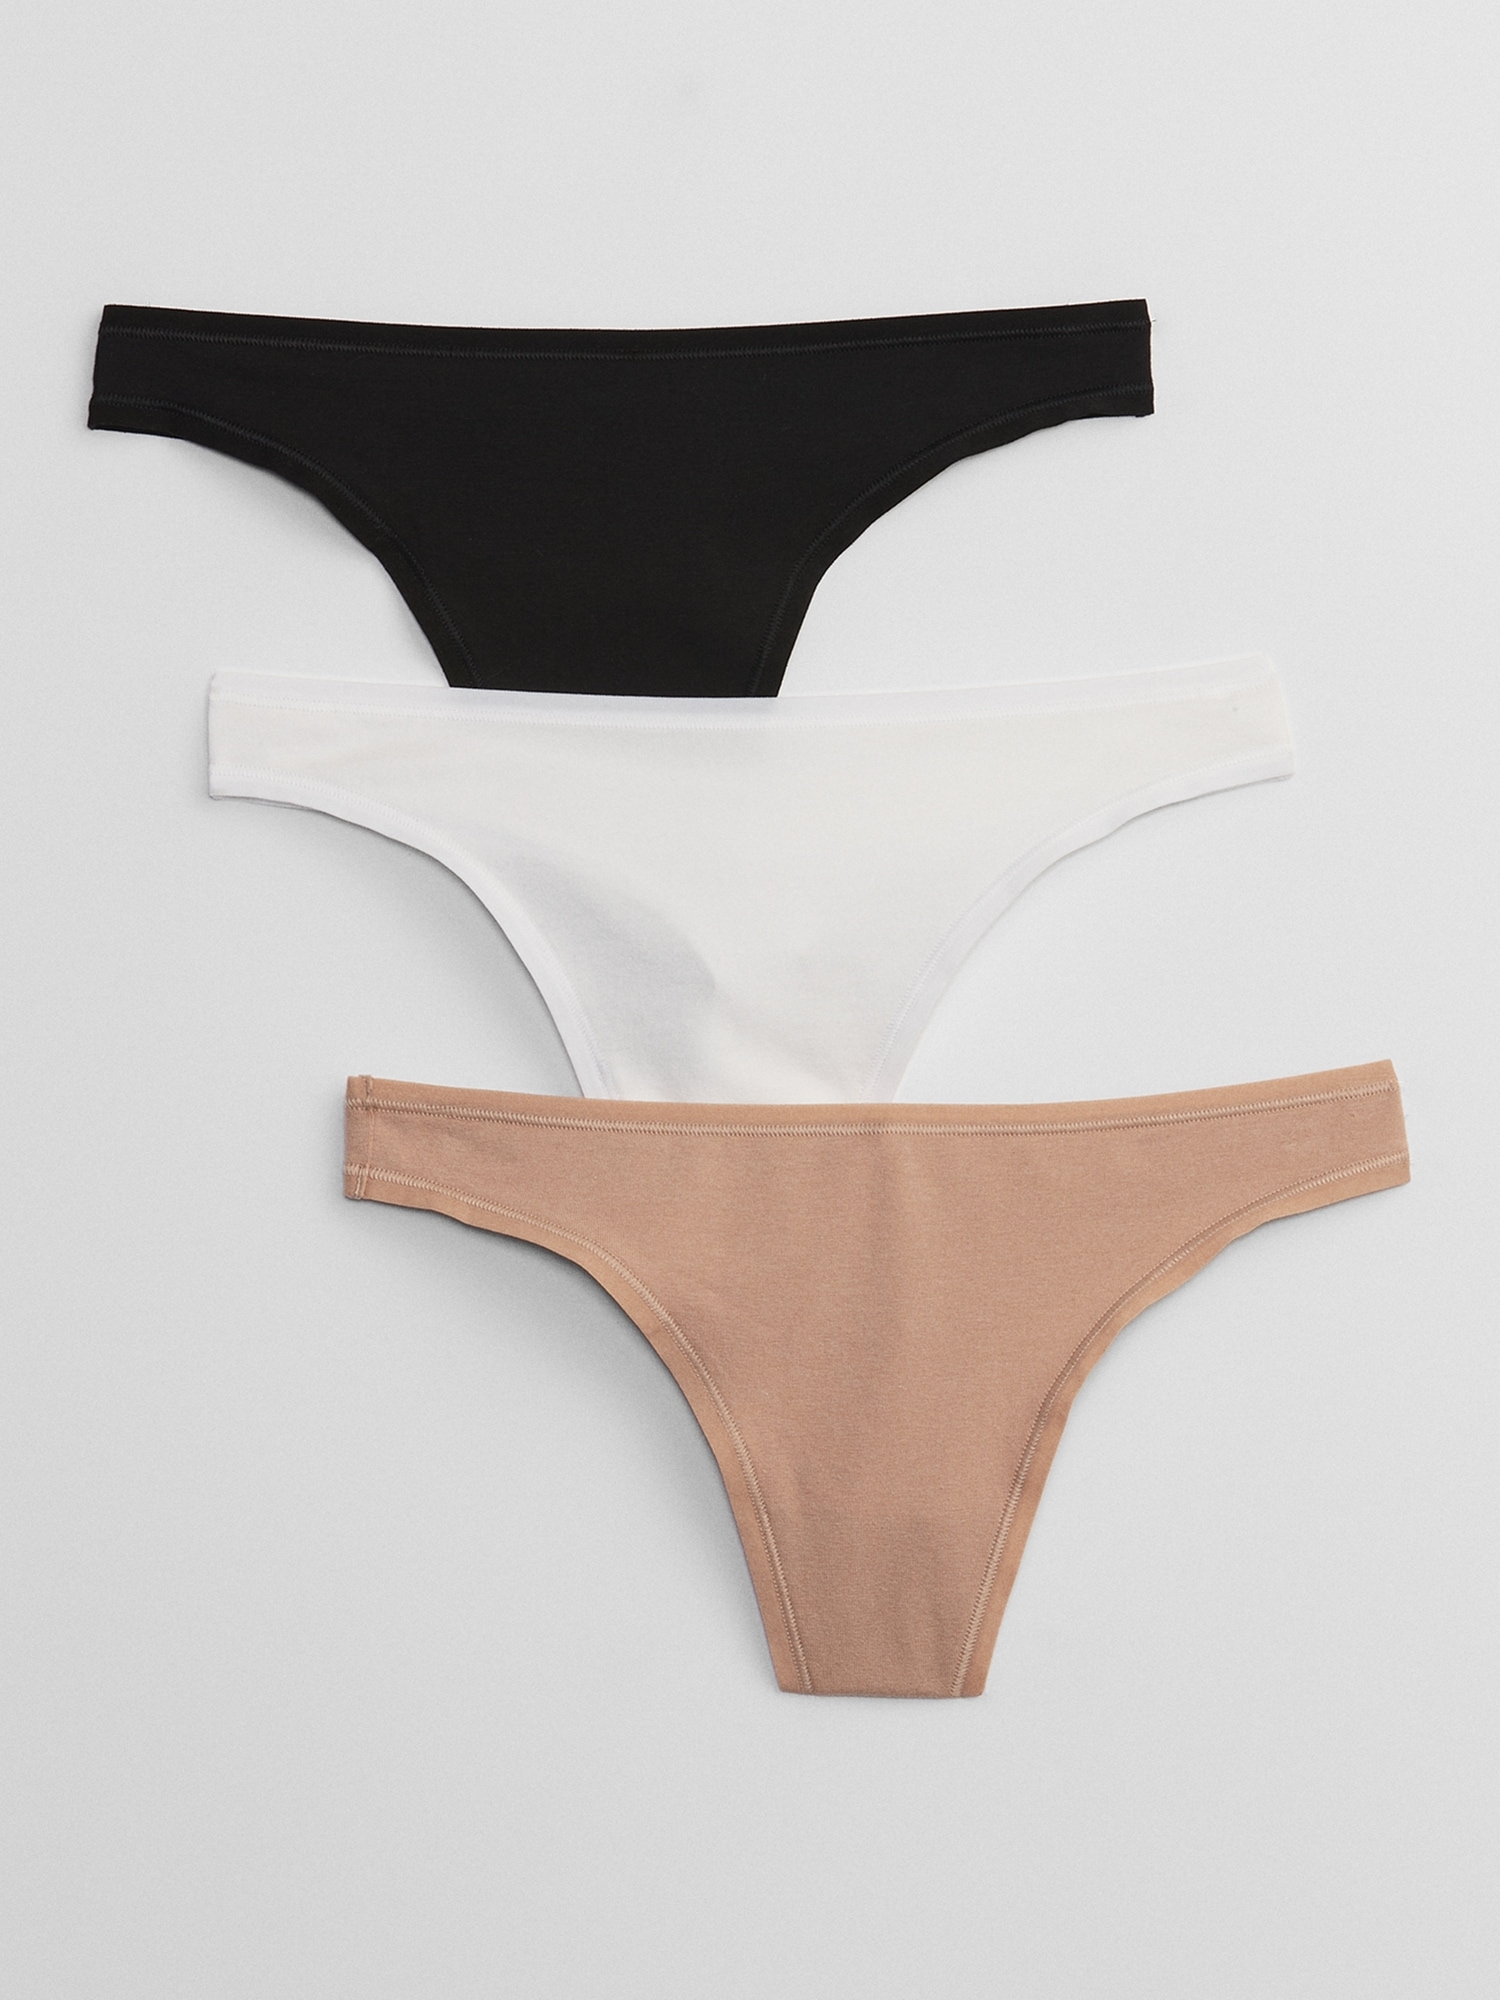 Gap Factory: Up to 75% Off Select Men's Women's & Kids' Apparel: 3-Pack Organic Cotton Thongs $7.29, Men's Straight Jeans $15 & More + Free S/H  on $50+